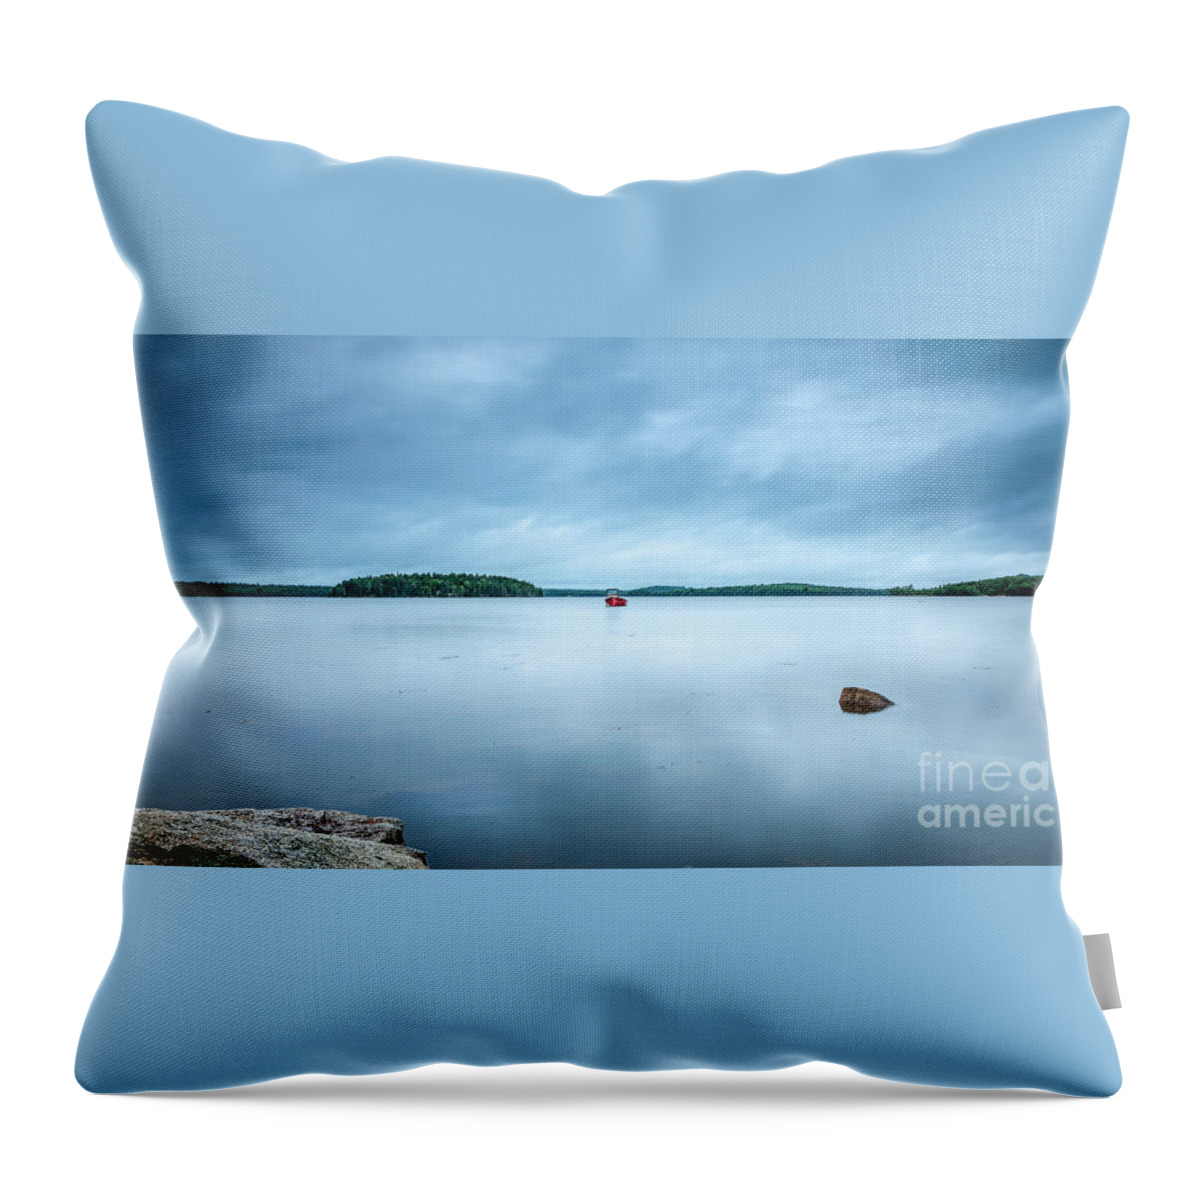 America Throw Pillow featuring the photograph Bay Mirror by Susan Cole Kelly